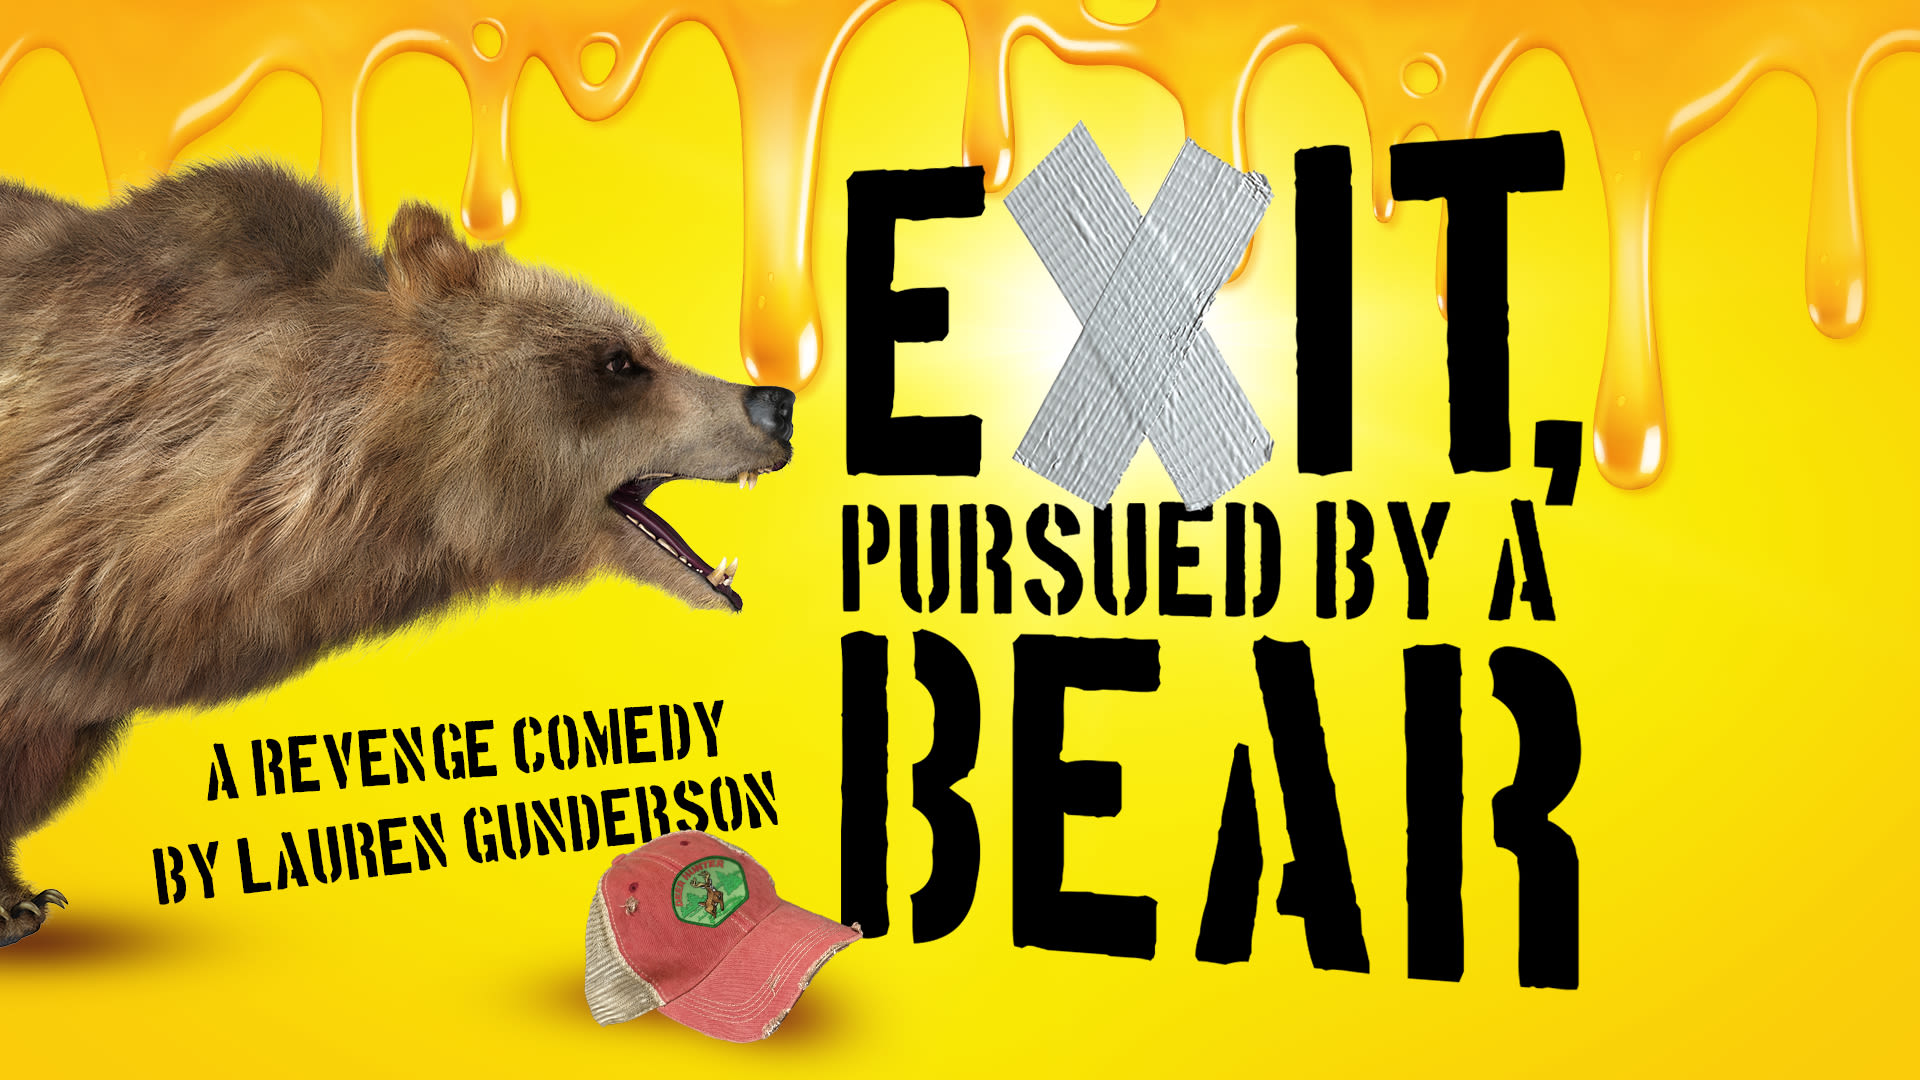 'Exit, Pursued by a Bear' - A dark revenge comedy